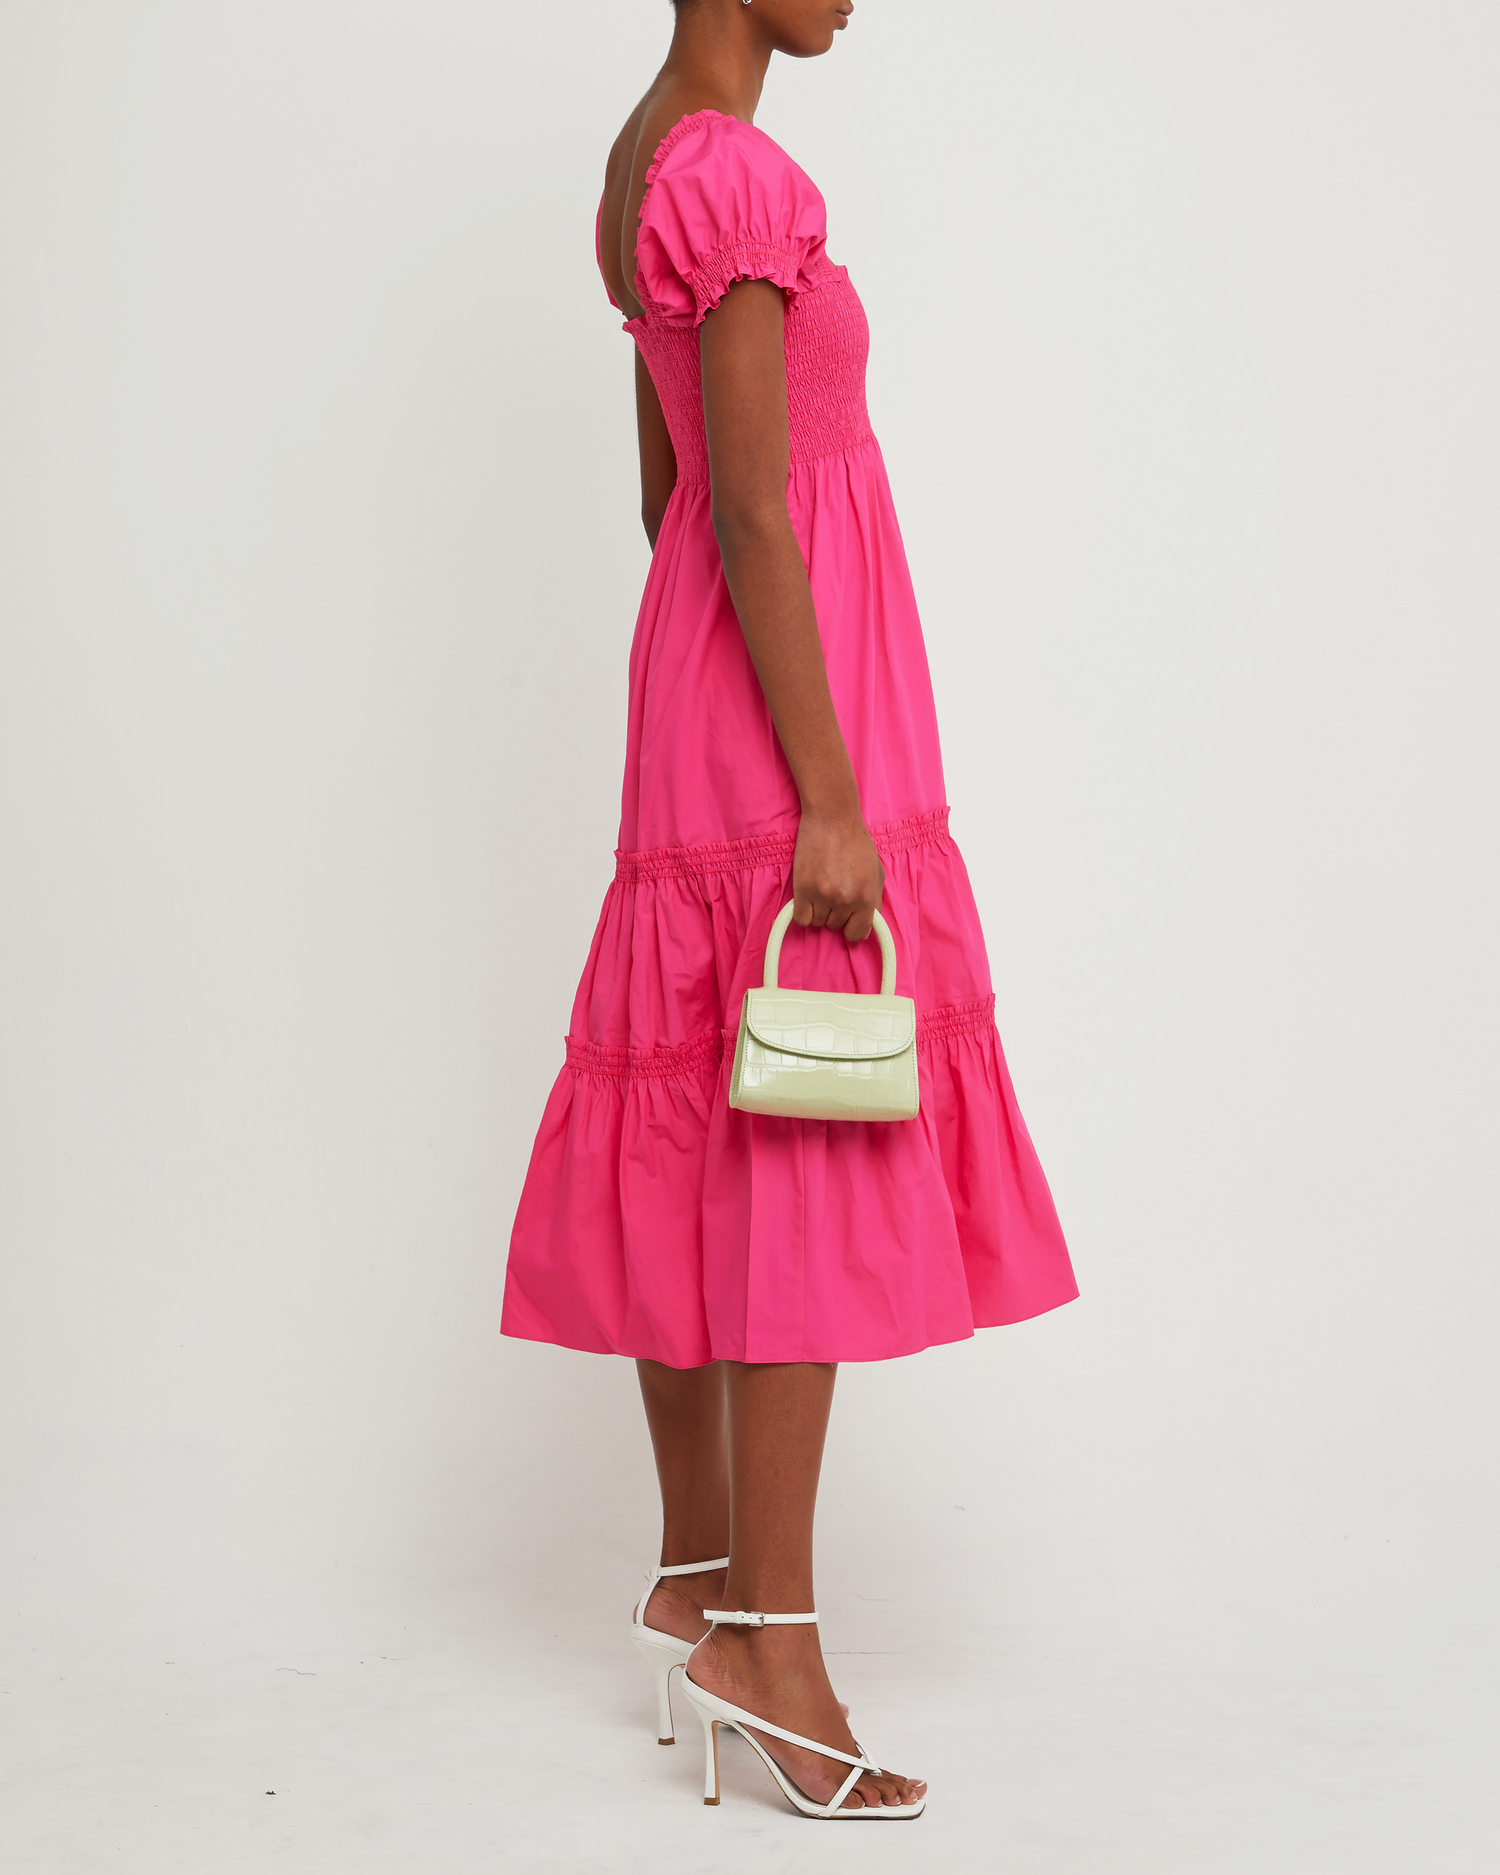 Third image of Square Neck Smocked Maxi Dress, a pink maxi dress, smocked, puff sleeves, short sleeves